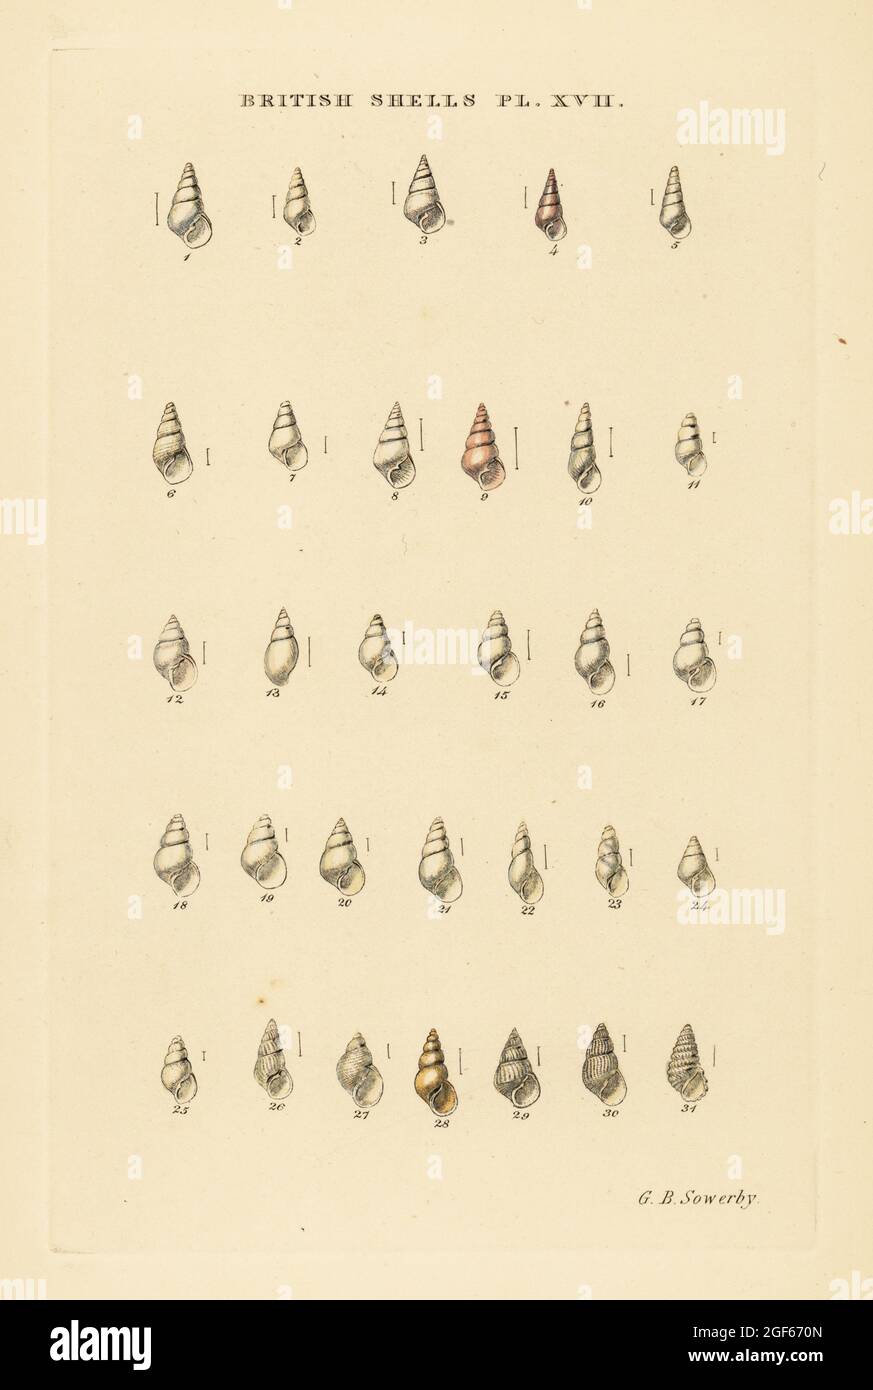 Minute pyramid sea shell varieties, Odostomia, etc. Handcoloured copperplate engraving by George Brettingham Sowerby from his own Illustrated Index of British Shells, Sowerby and Simpkin, Marshall & Co., London, 1859. George Brettingham Sowerby II (1812-1884), British naturalist, illustrator, and conchologist. Stock Photo